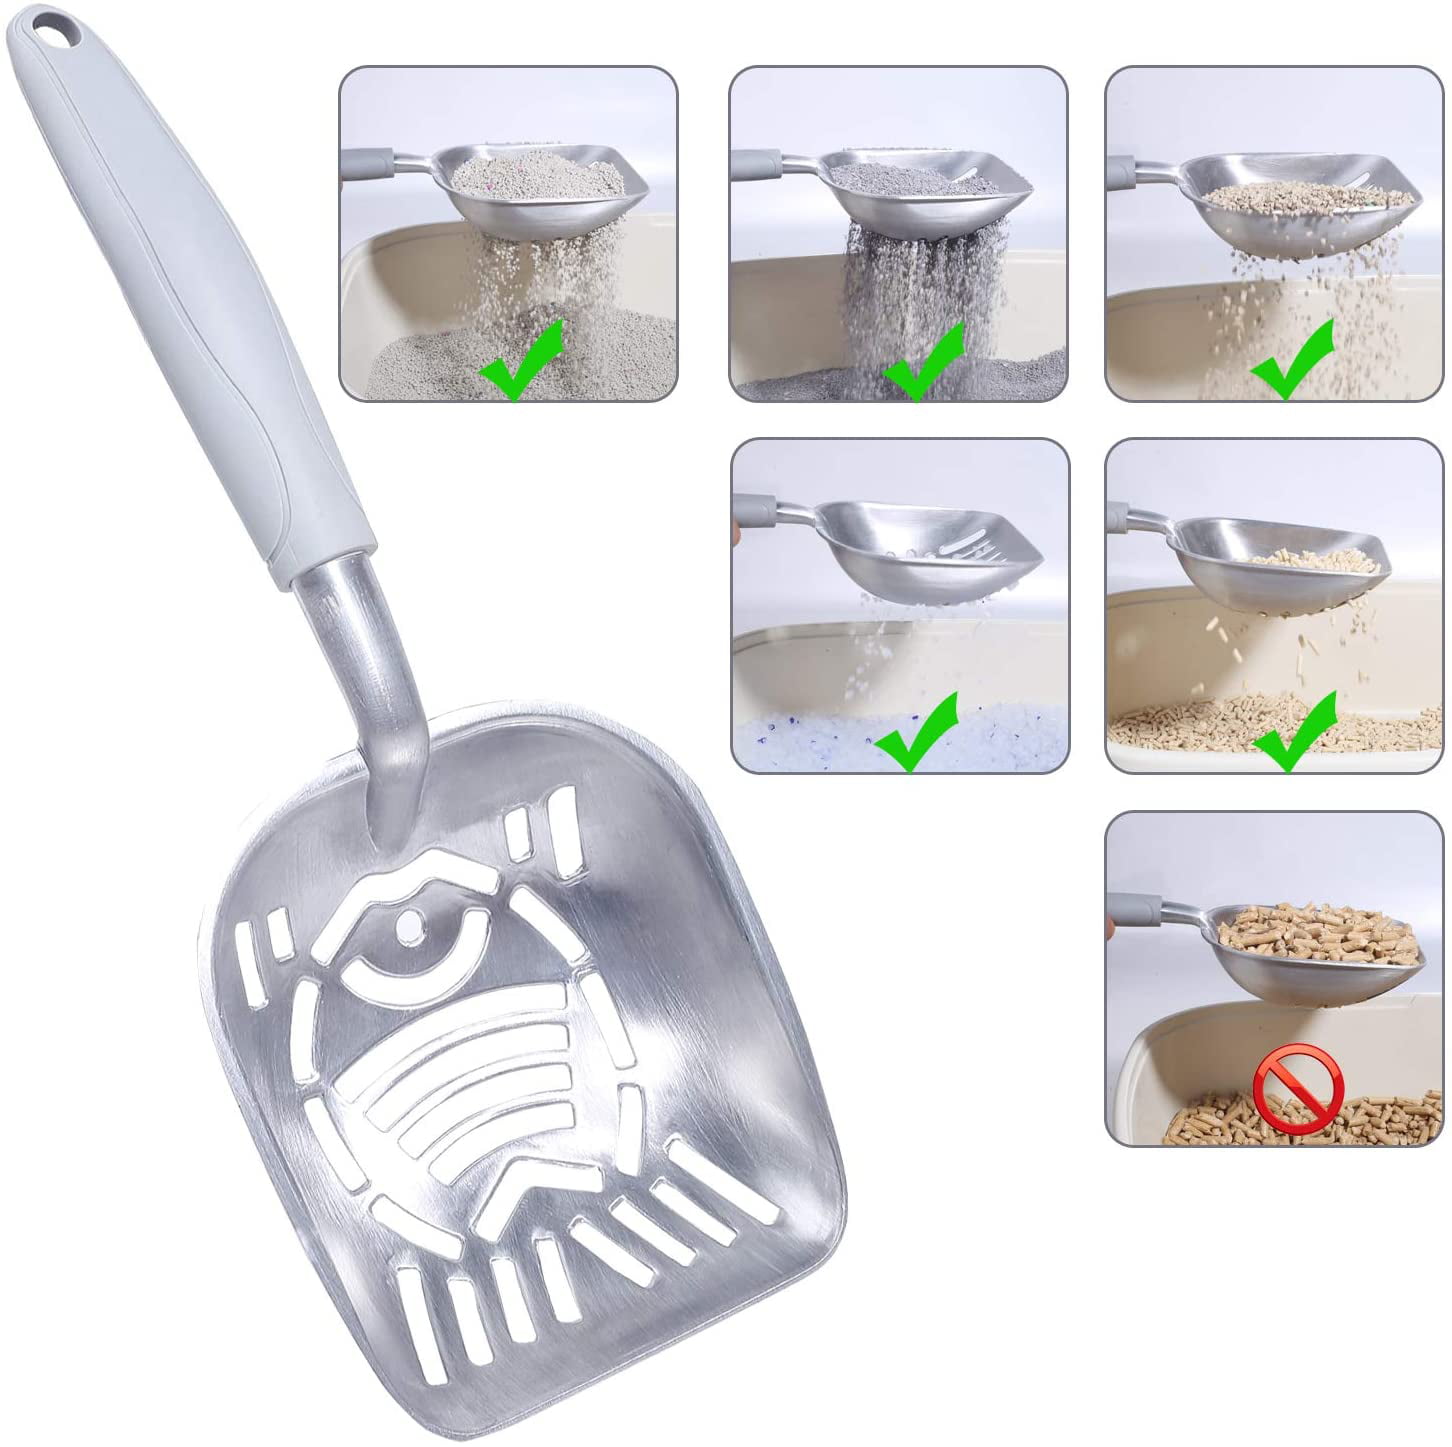 Sifter with Deep Shovel and Ergonomic Handle Jumbo Size Durable Metal Litter Scoop for Kitty Vivaglory Cat Litter Scoop Made of Heavy Duty Solid Aluminum 1PC 